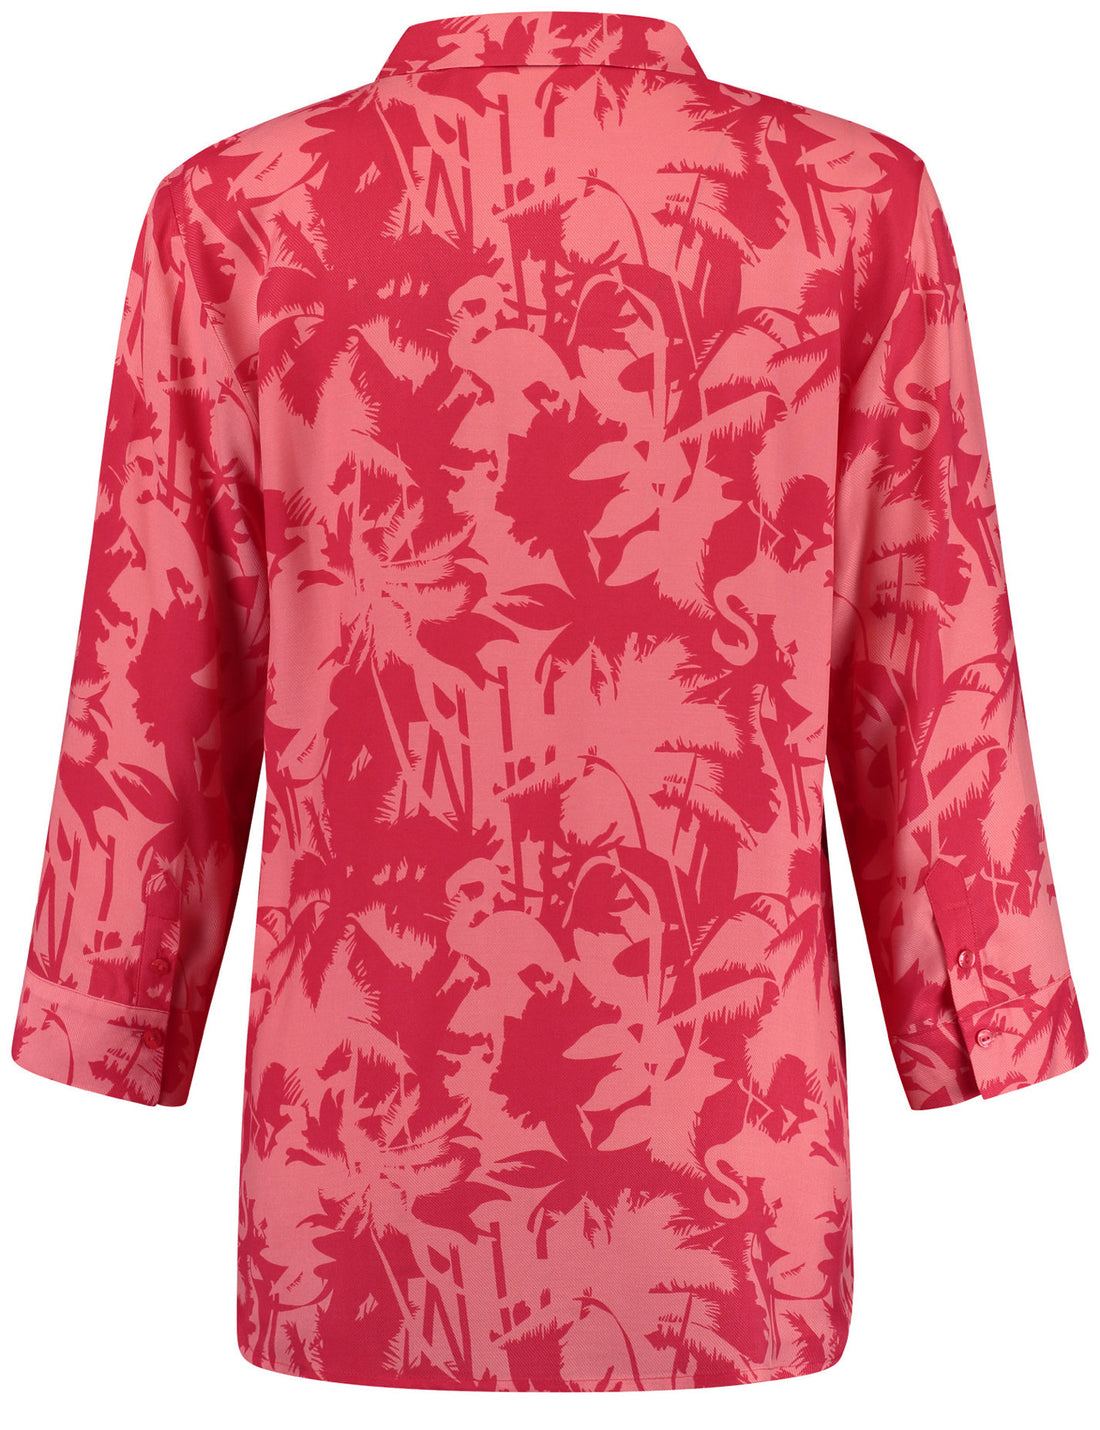 Figure-Skimming Patterned 3/4-Sleeve Blouse Made Of Sustainable Fabric_260002-66408_6069_02